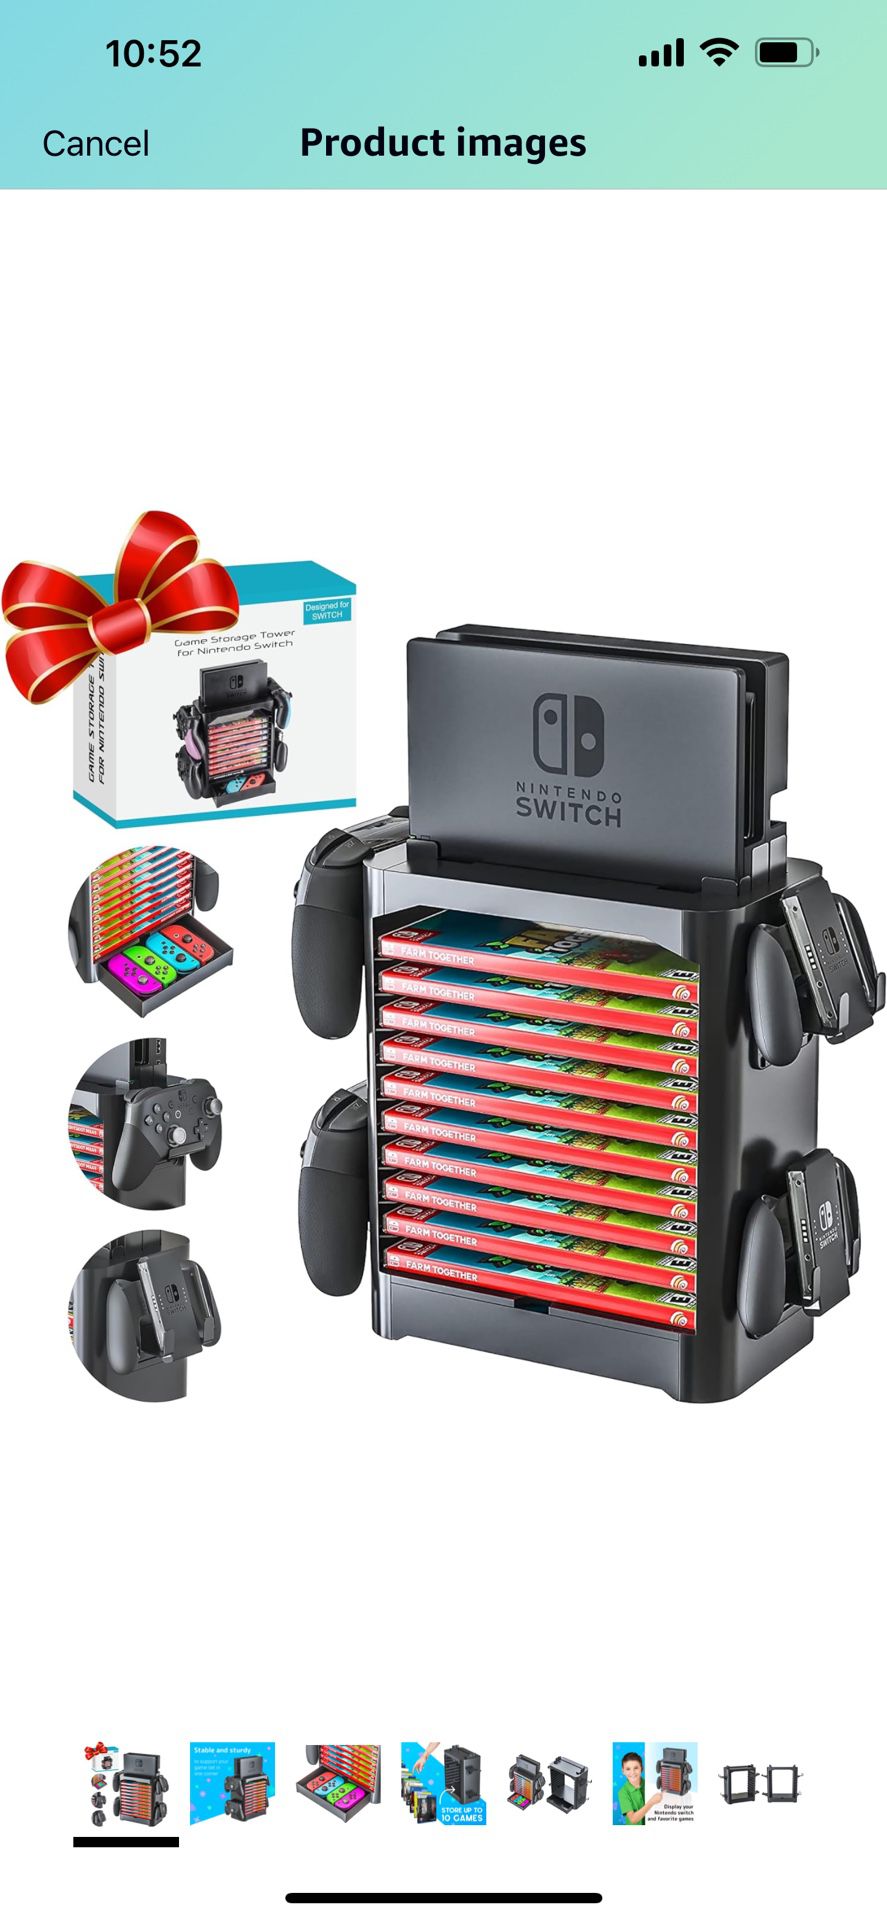 Skywin Game Storage Tower for Nintendo Switch (Black)